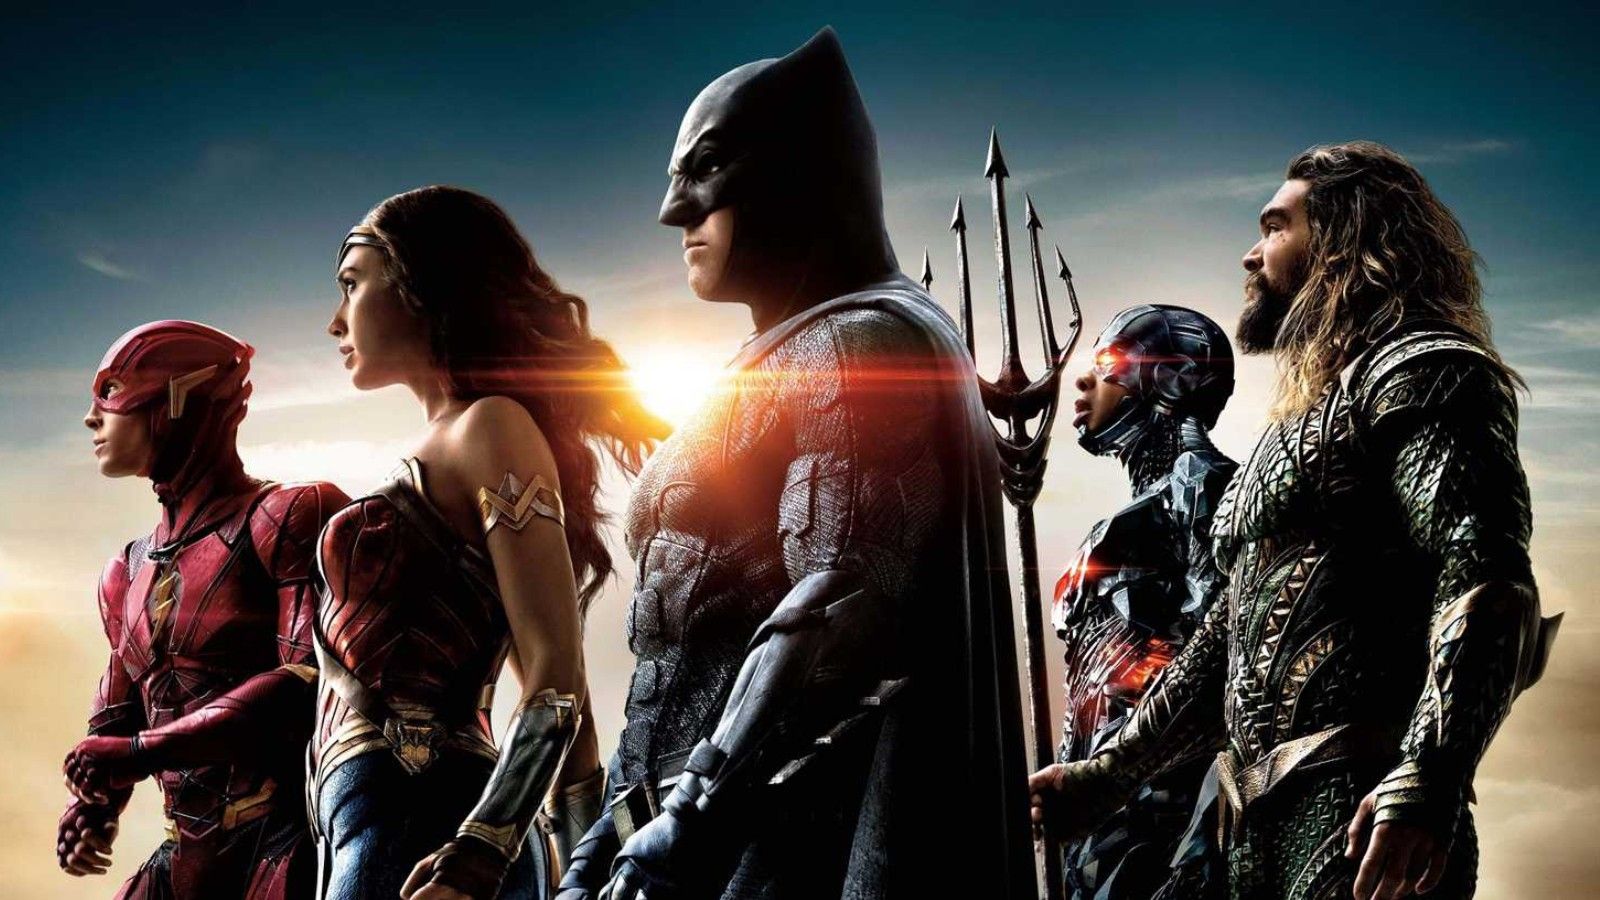 When is Zack Snyder's Justice League coming out? Release date, cast, more